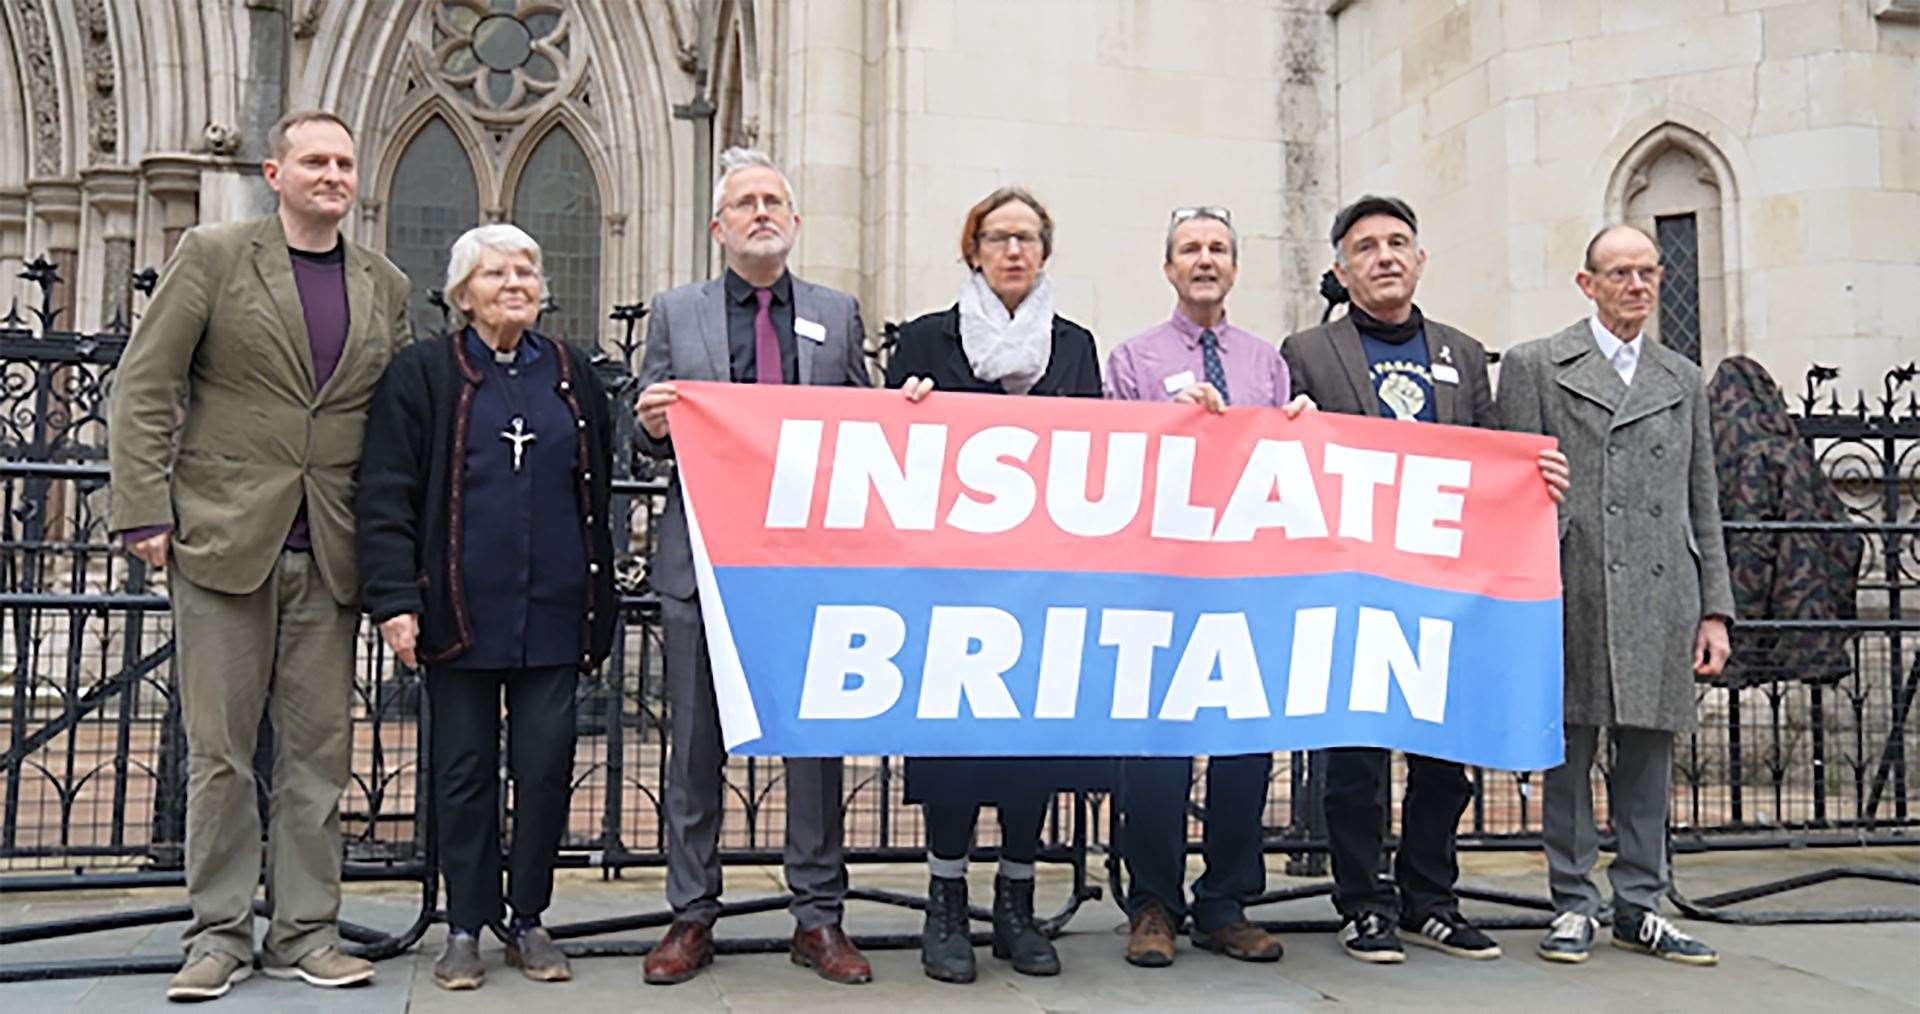 Paul Sheeky, Rev Sue Parfitt, Biff Whipster, Ruth Jarman, Stephen Pritchard, Steve Gower and Richard Ramsden outside the High Court (Elspeth Keep/PA)